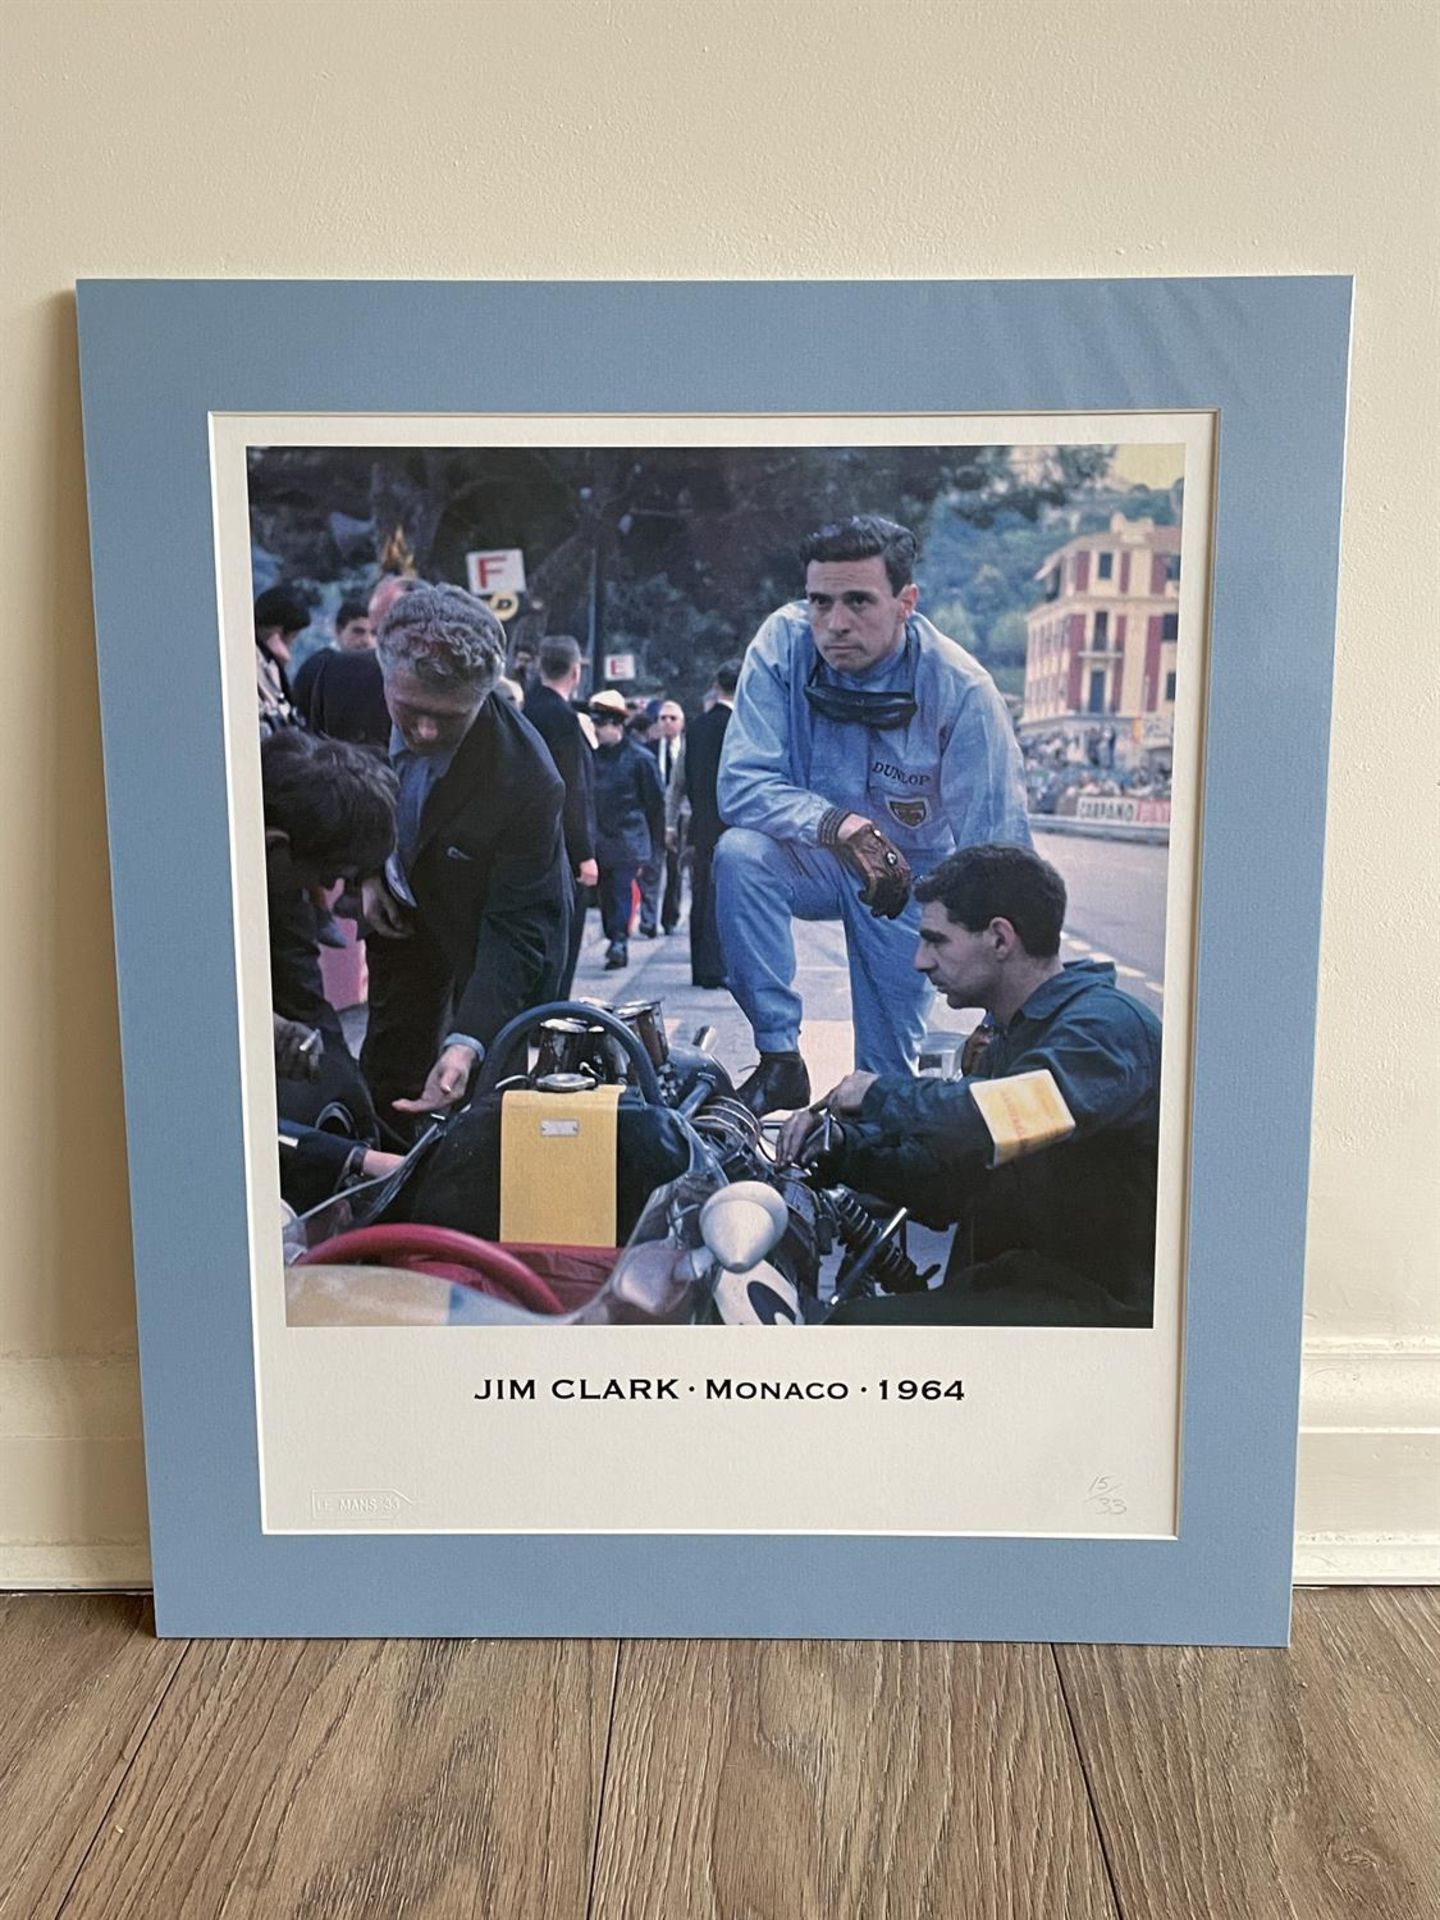 Jim Clark's 1964 Lotus-Climax Framed Photo - Image 3 of 3